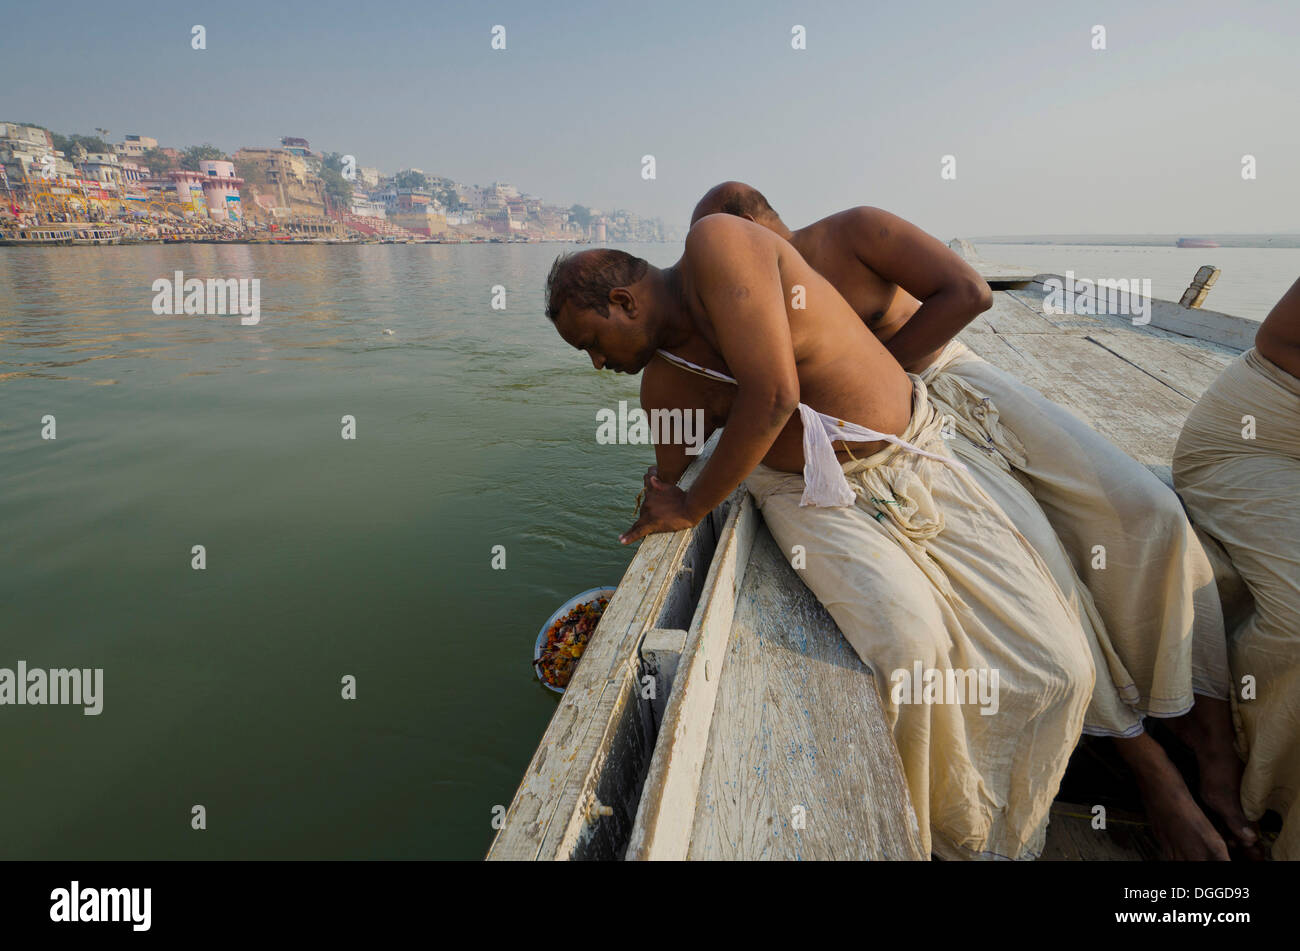 Remains of the cremation of a family member are offered to the holy river Ganges, Varanasi, India, Asia Stock Photo